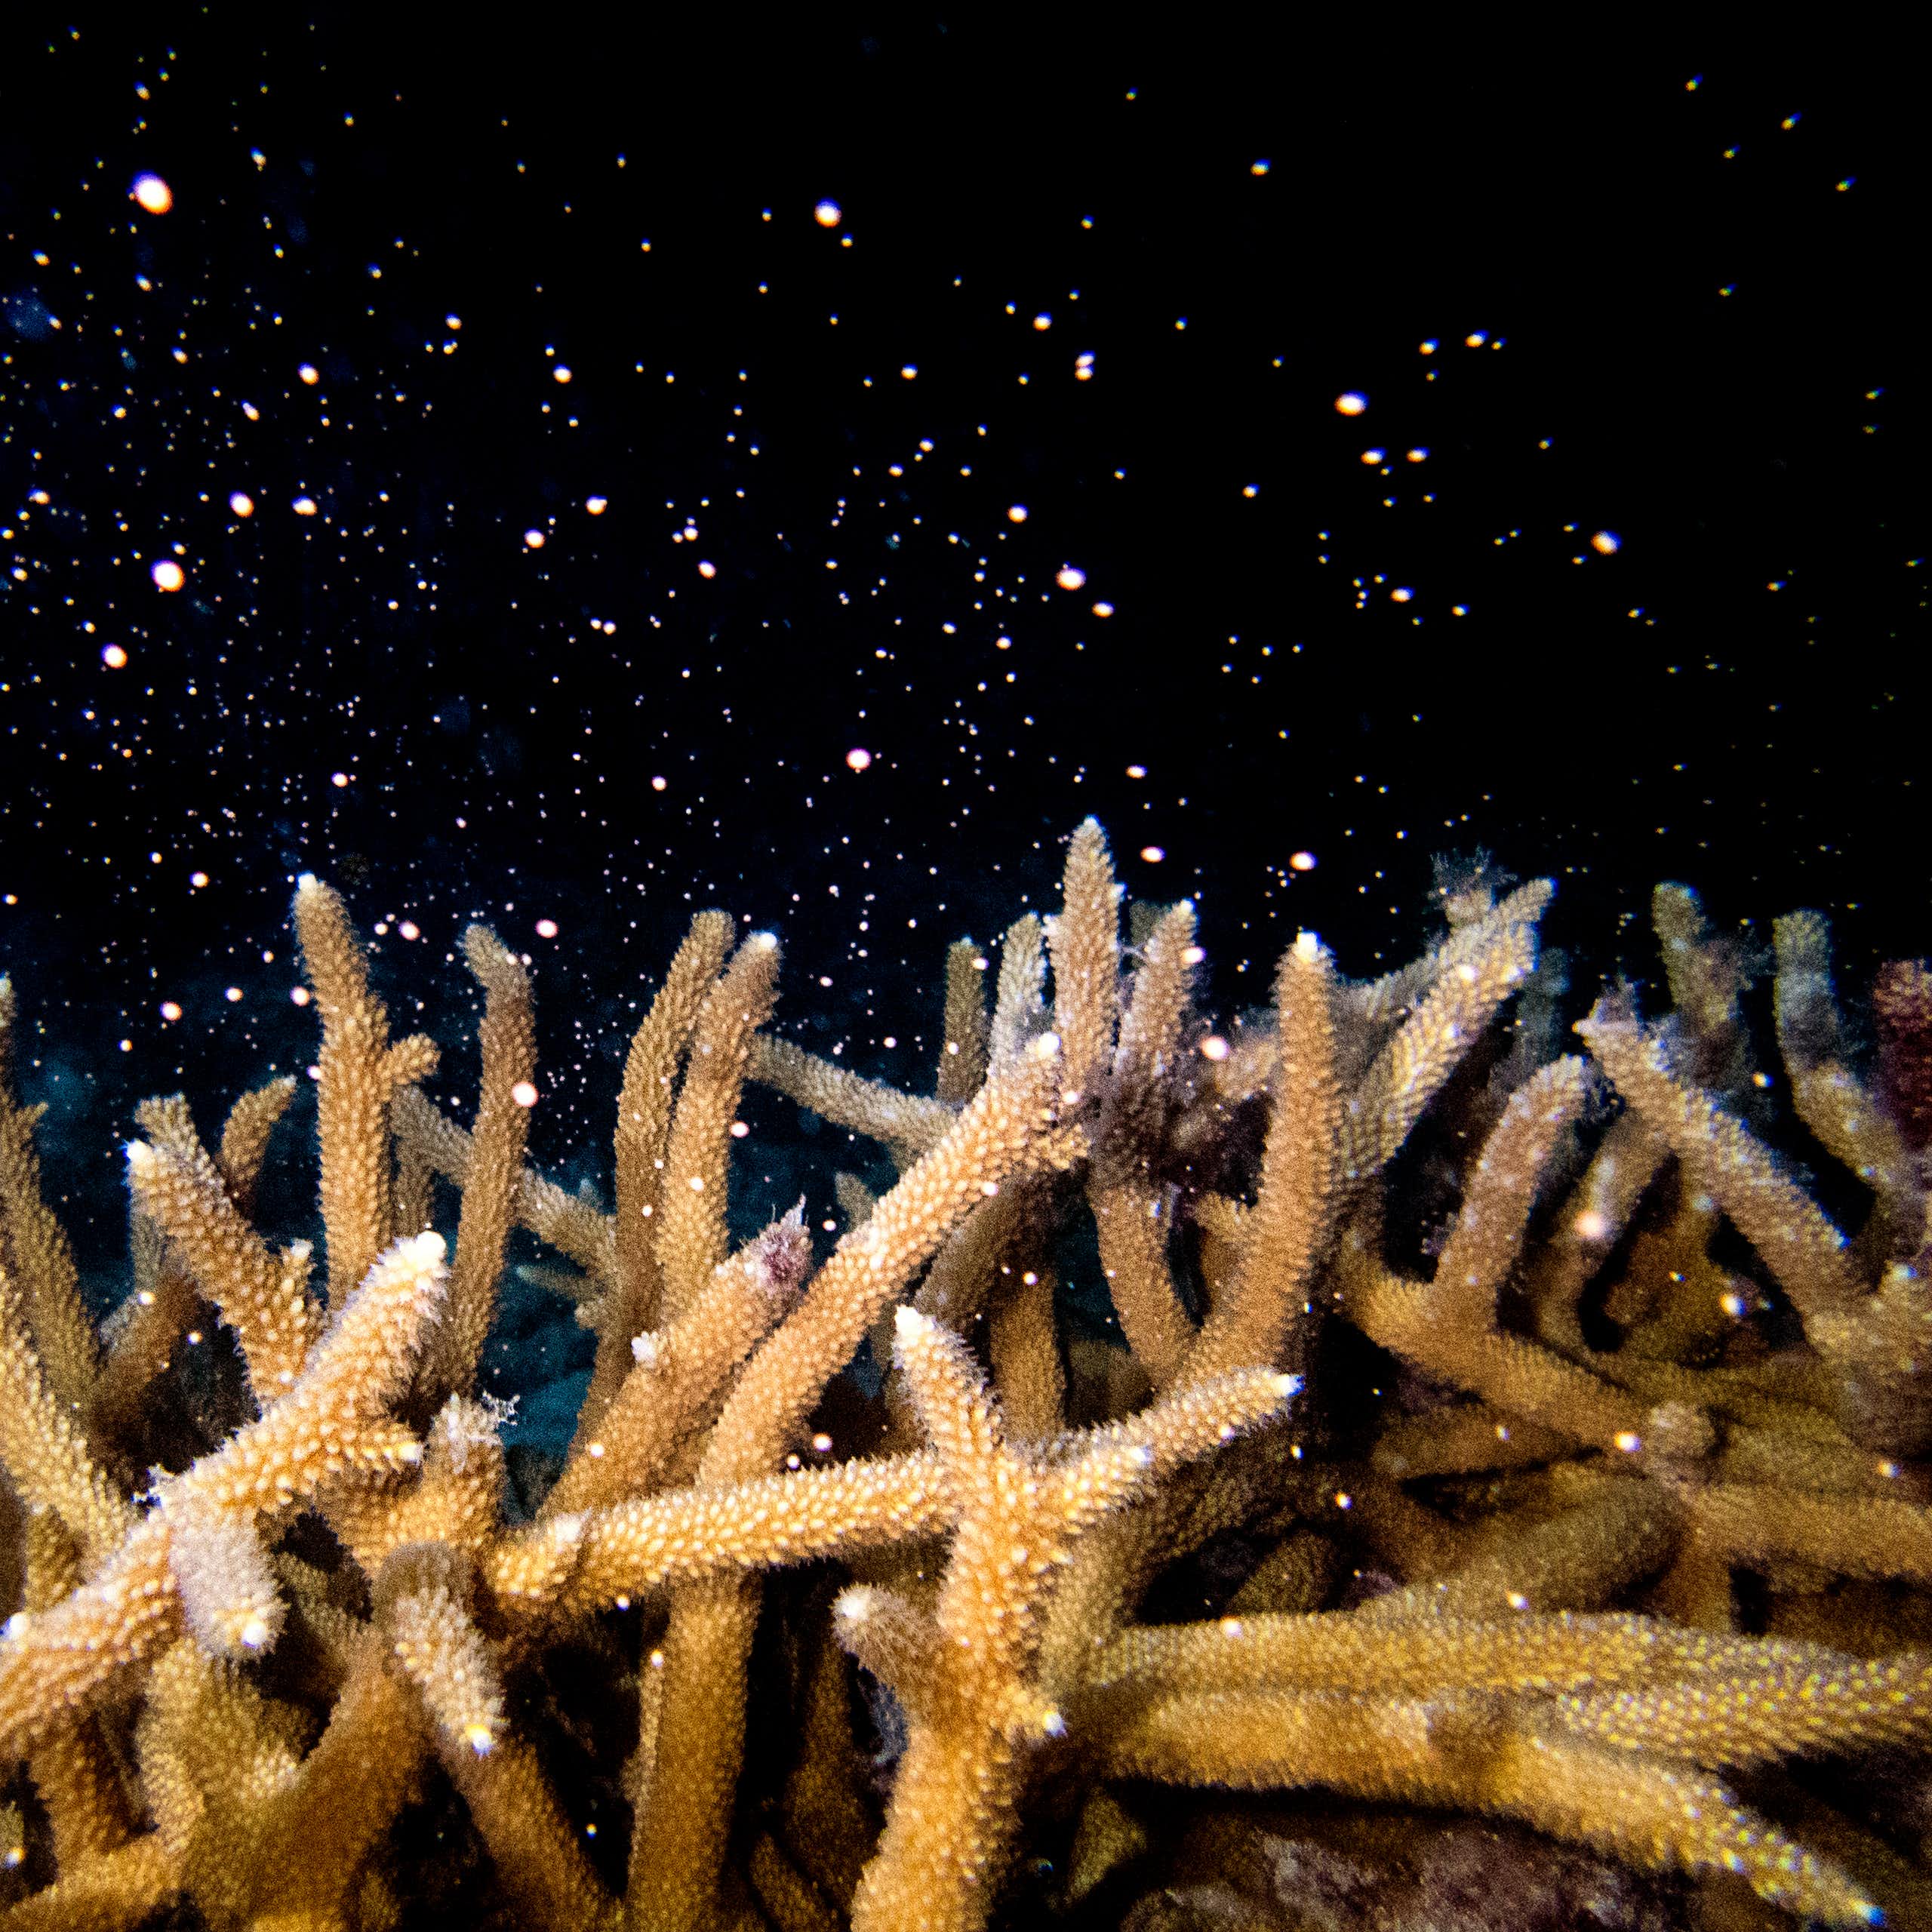 Spiky brown corals release white particles into the dark surrounding water